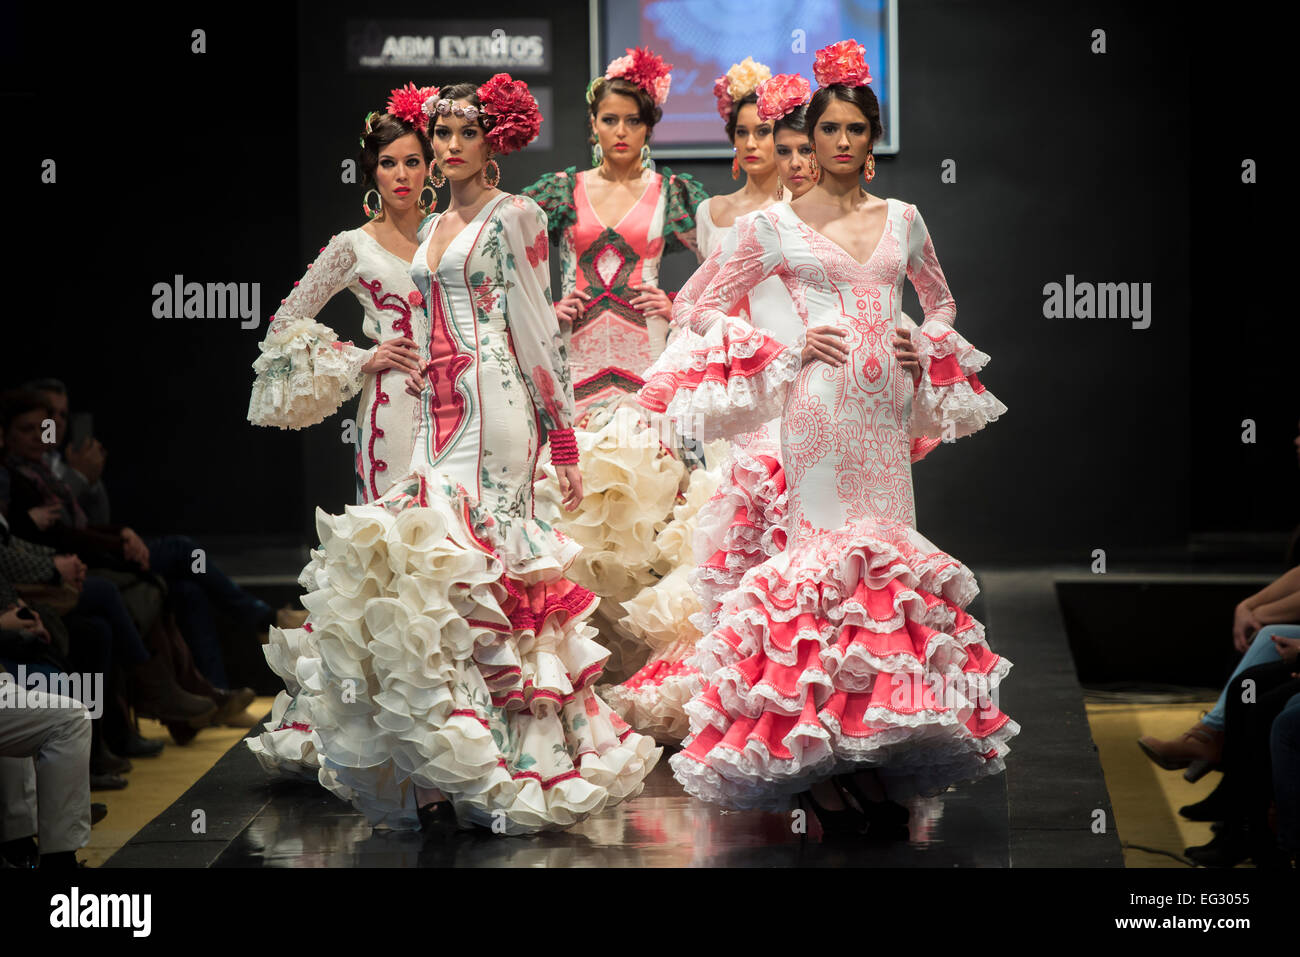 Jerez de la Frontera, Andalusia, Spain, 14 February, 2015: Models pictured  on the catwalk during the